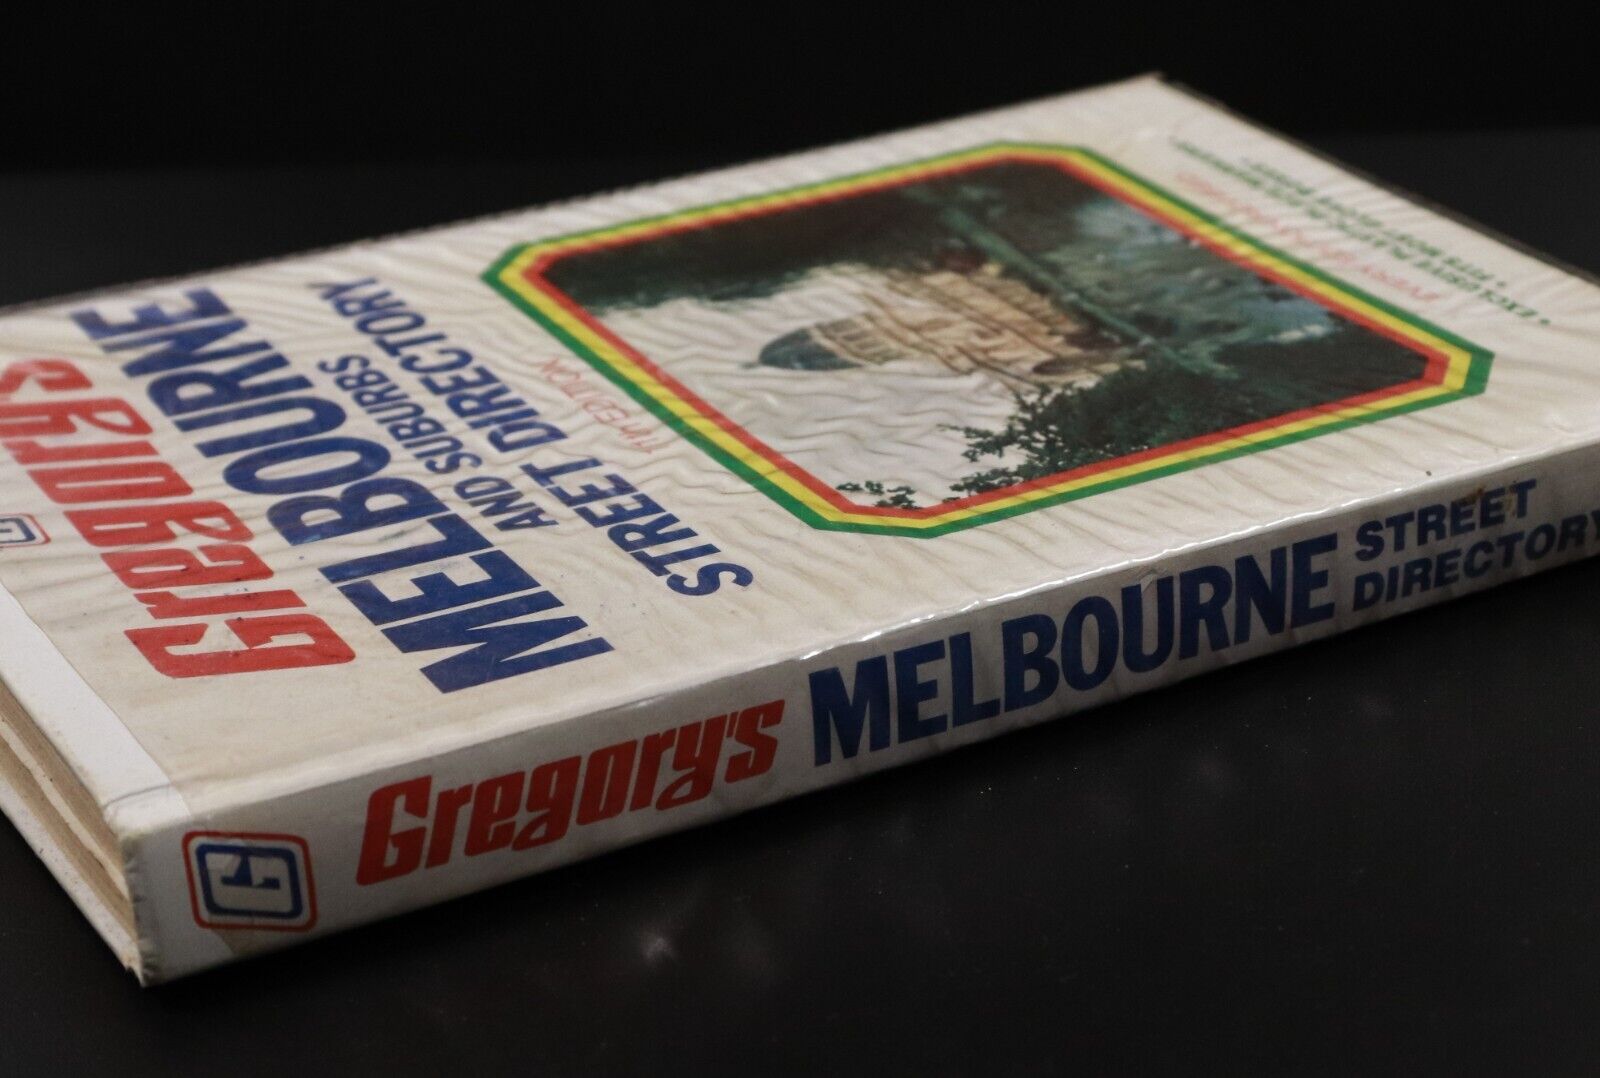 1977 Gregory's Street Directory Of Melbourne & Suburbs Vintage Maps Book - 0